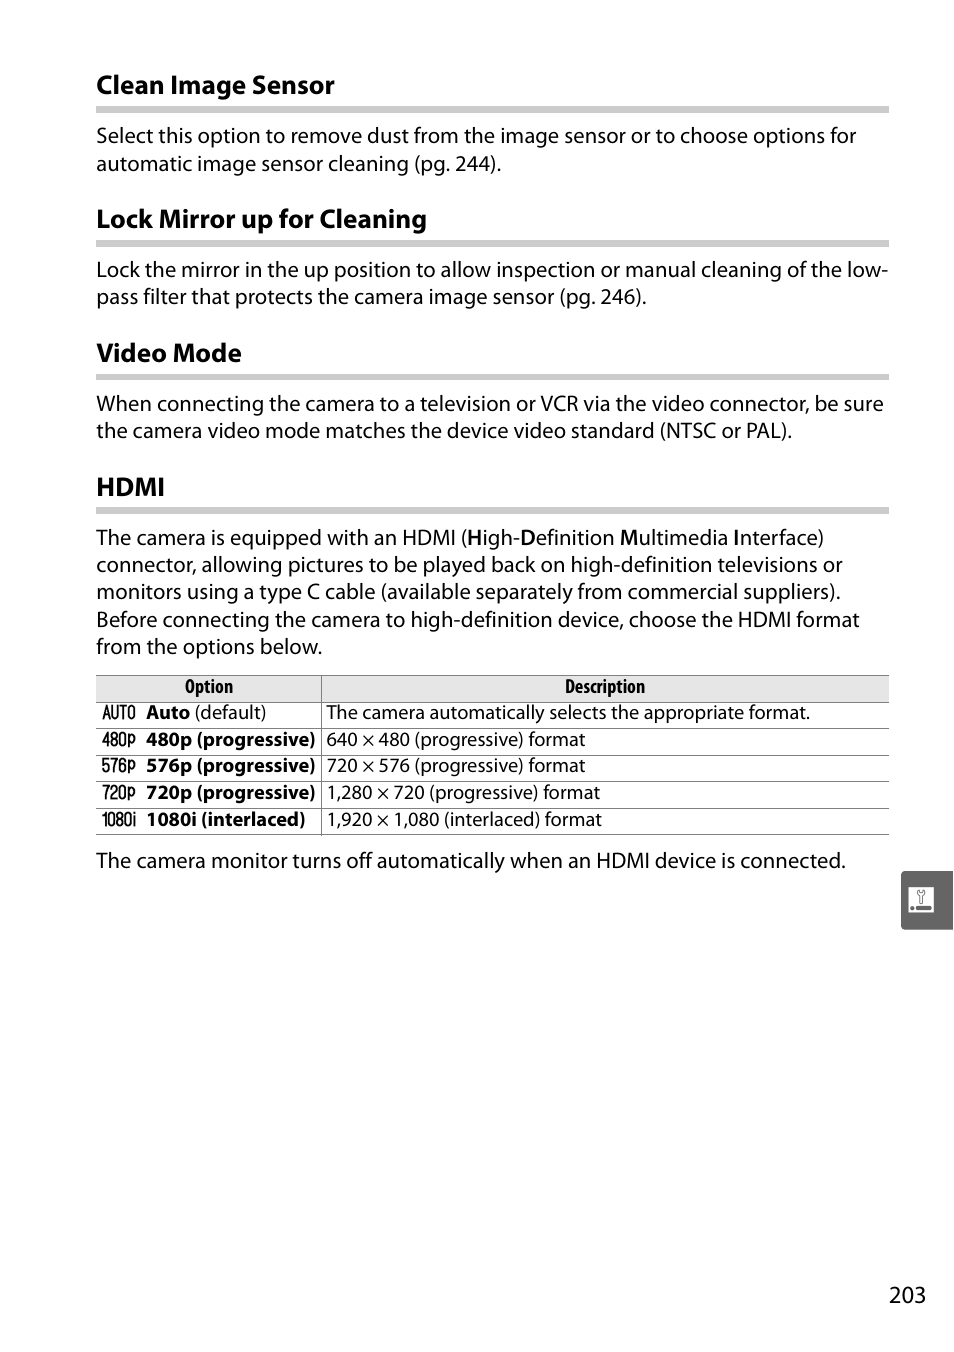 Clean image sensor, Lock mirror up for cleaning, Video mode | Hdmi | Nikon D90 User Manual | Page 223 / 300